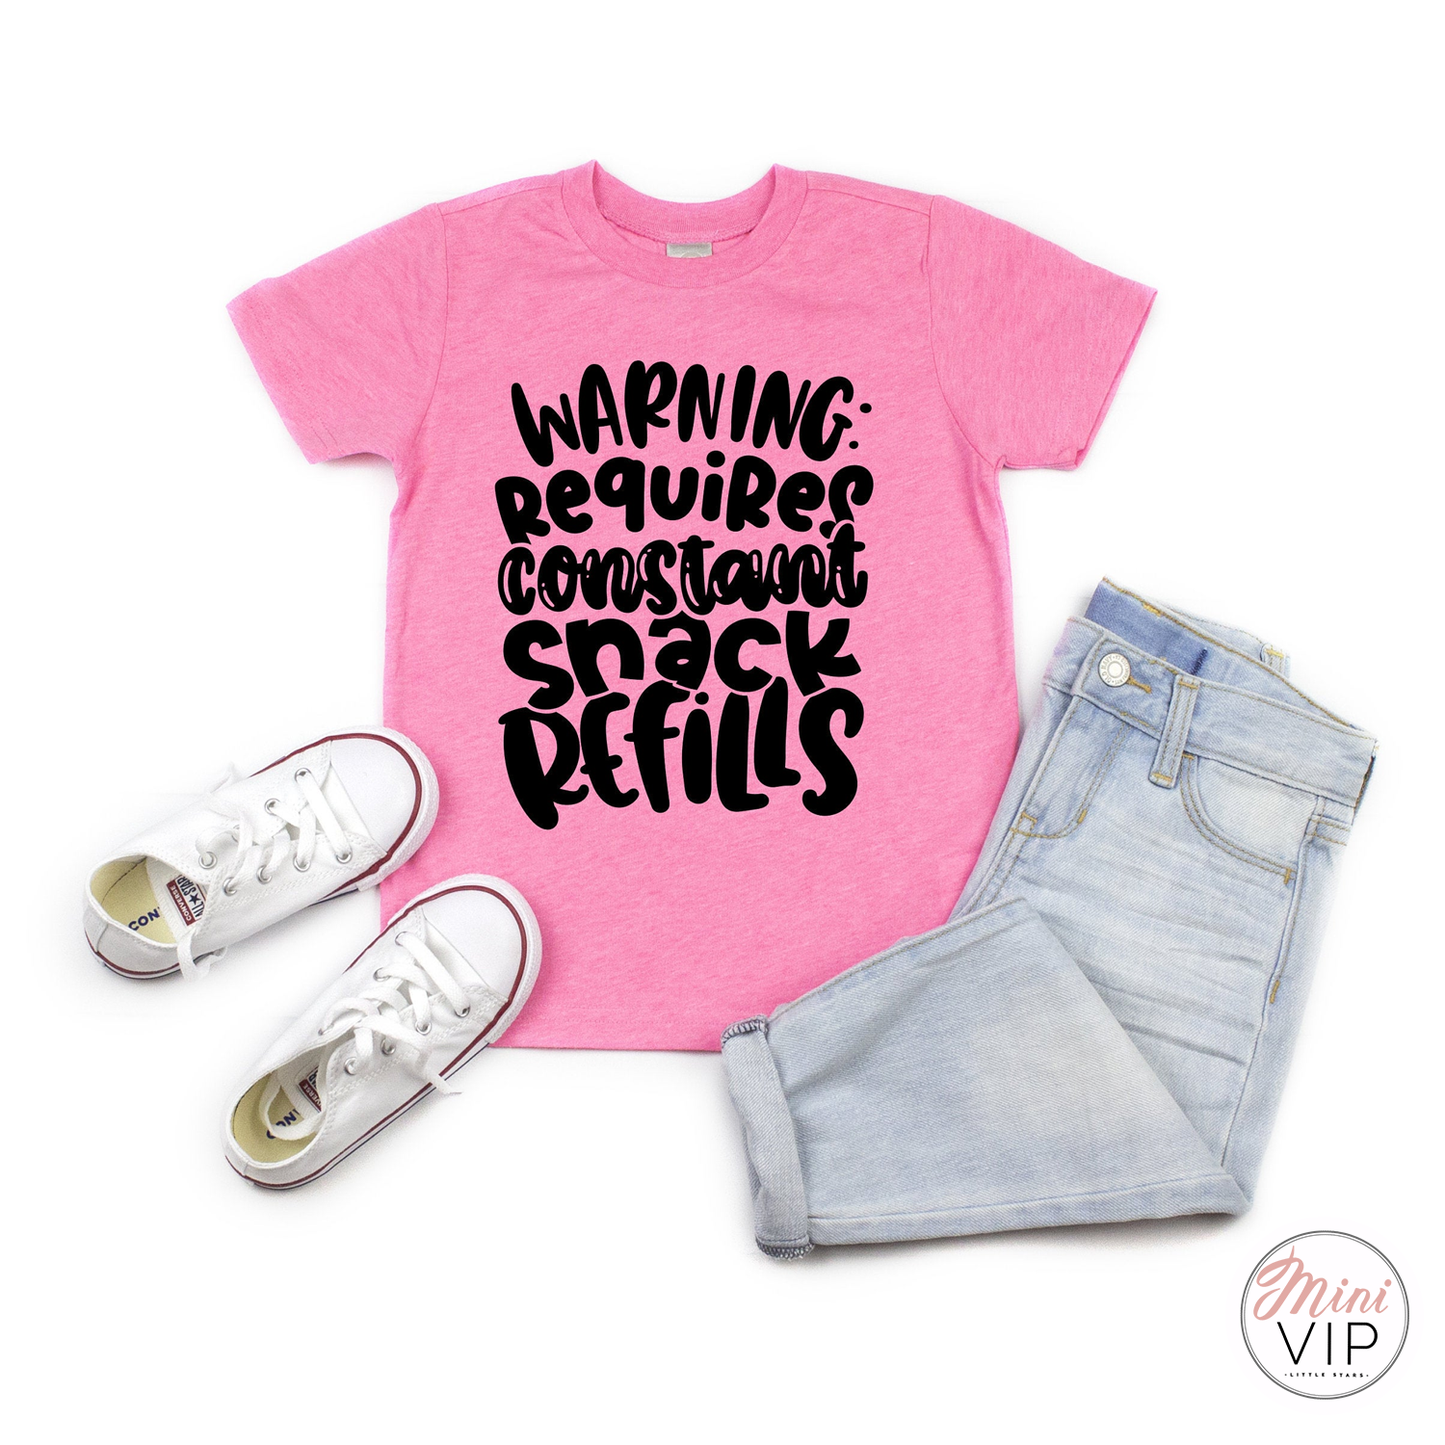 Warning Requires Constant Snack Refills Pink t-shirt